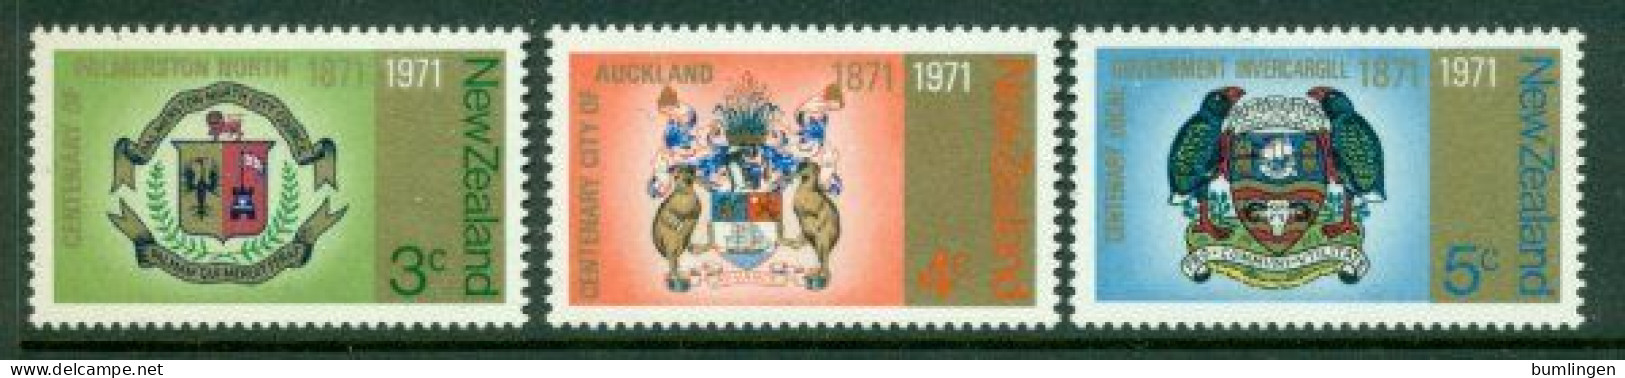 NEW ZEALAND 1971 Mi 554-56** City Coat Of Arms [B874] - Stamps